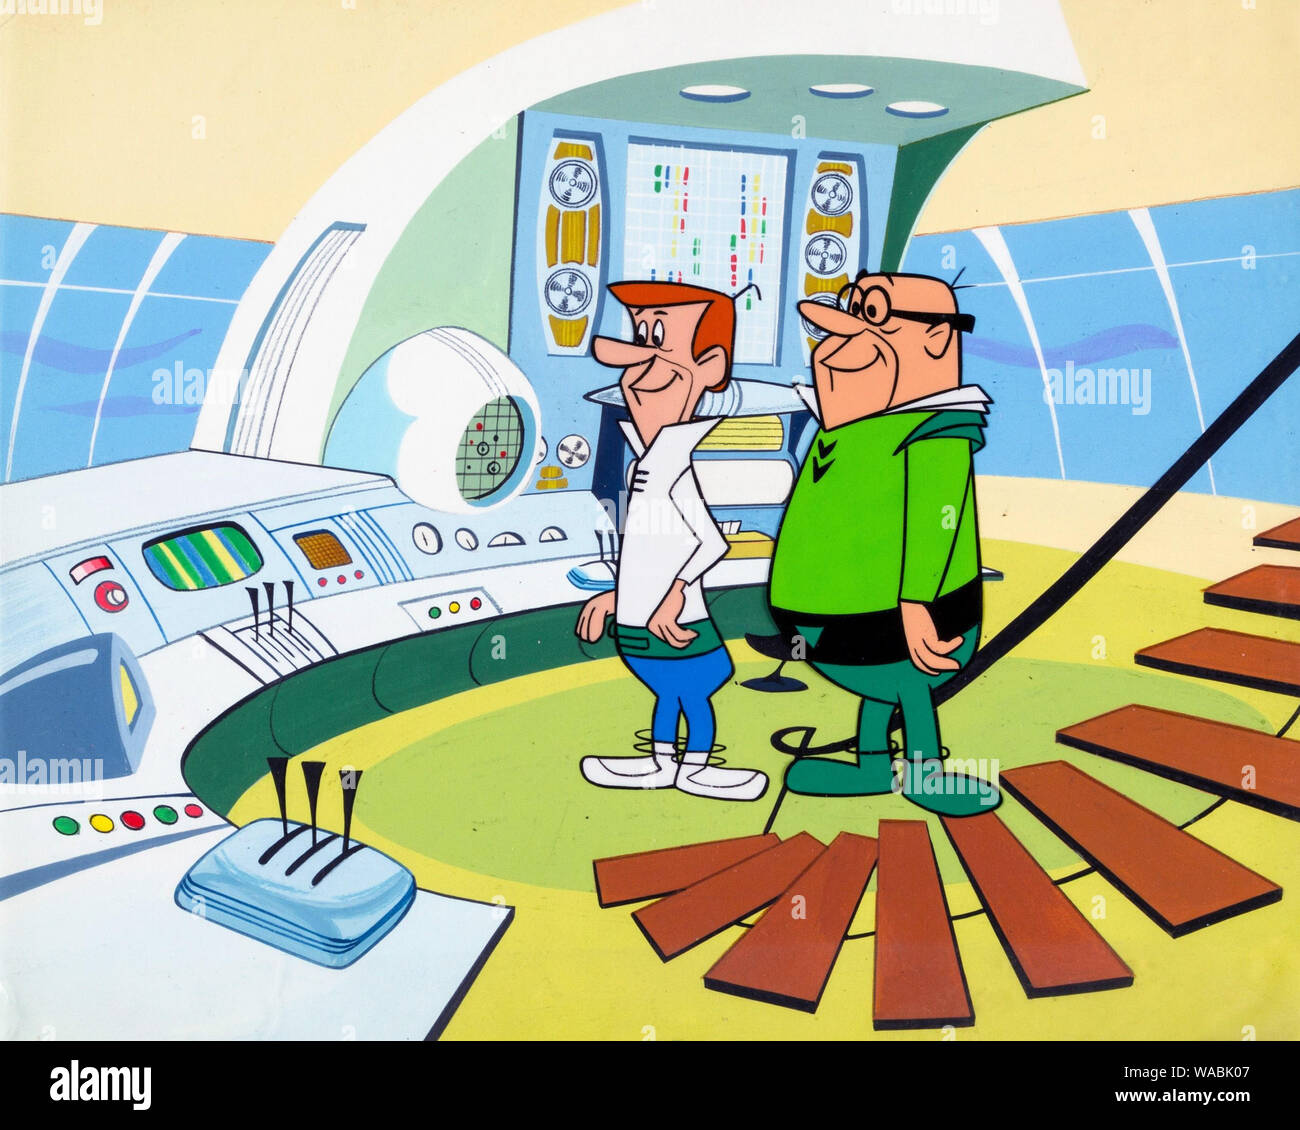 George Jetson, Spencer Cogswell, 'The Jetsons' (1962-1987) Screen Gems/Hanna-Barbera  File Reference # 33848-317THA Stock Photo